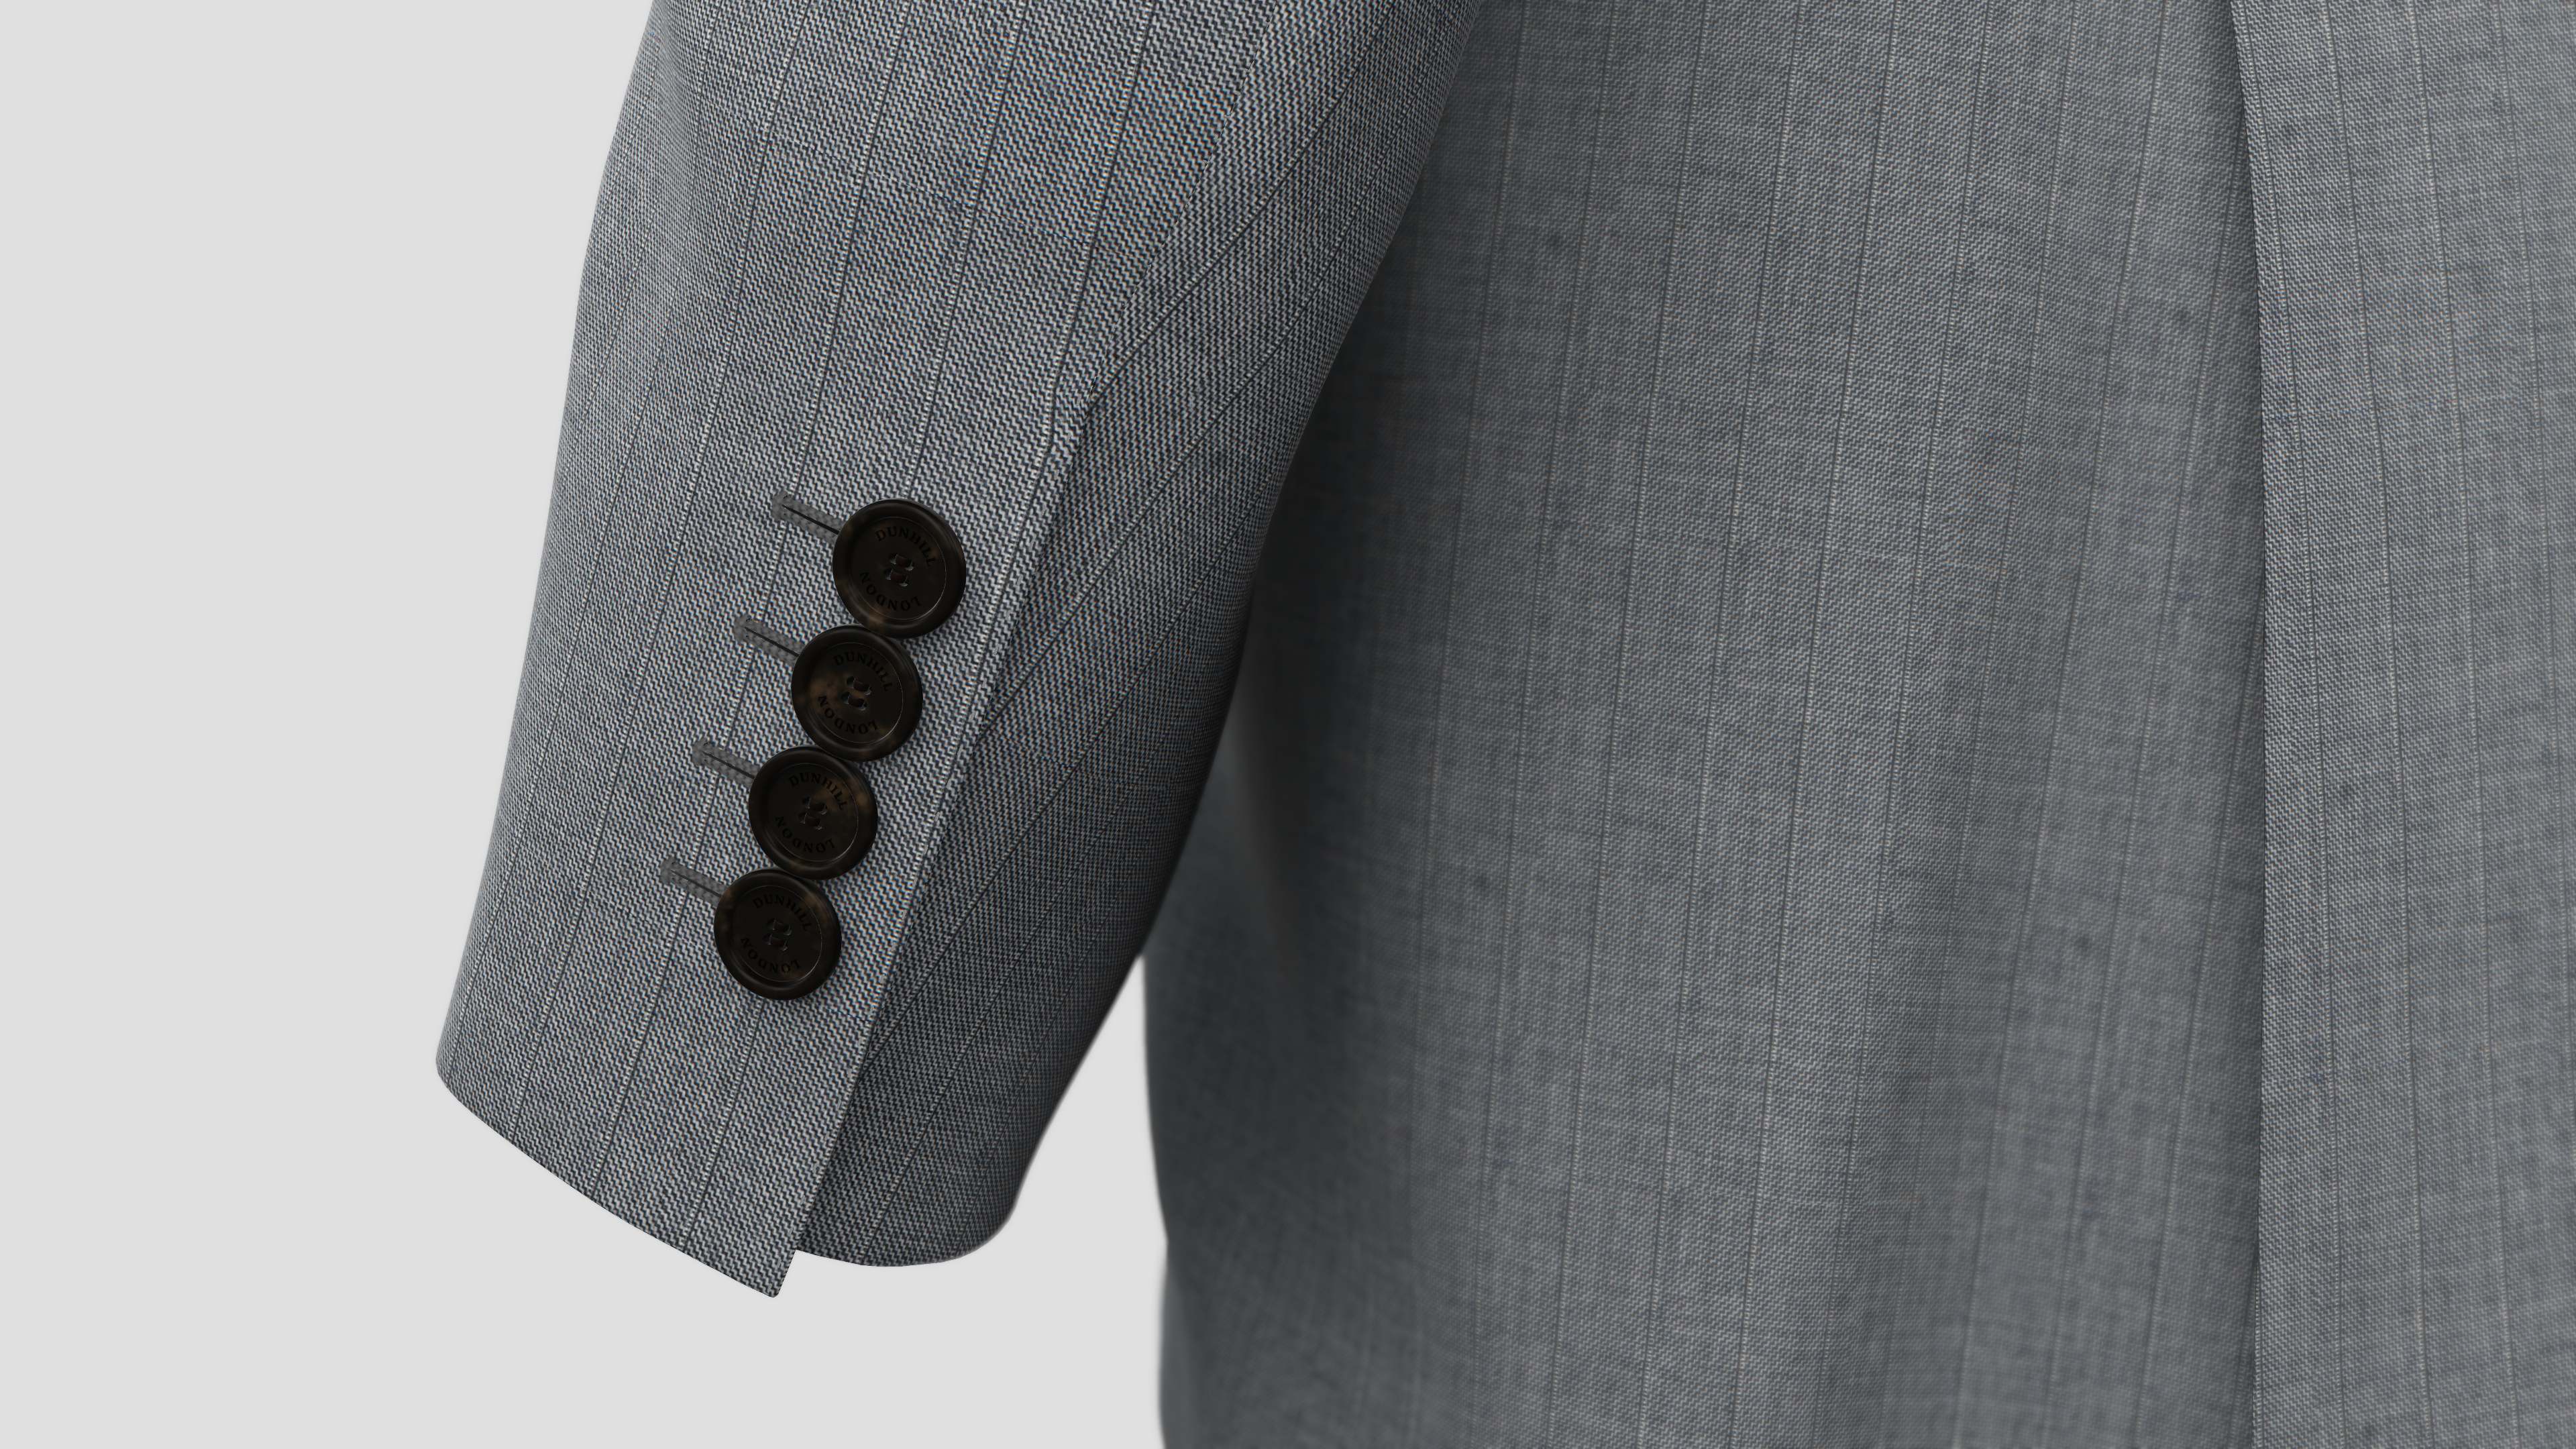 Photorealism 3D rendering of a suit